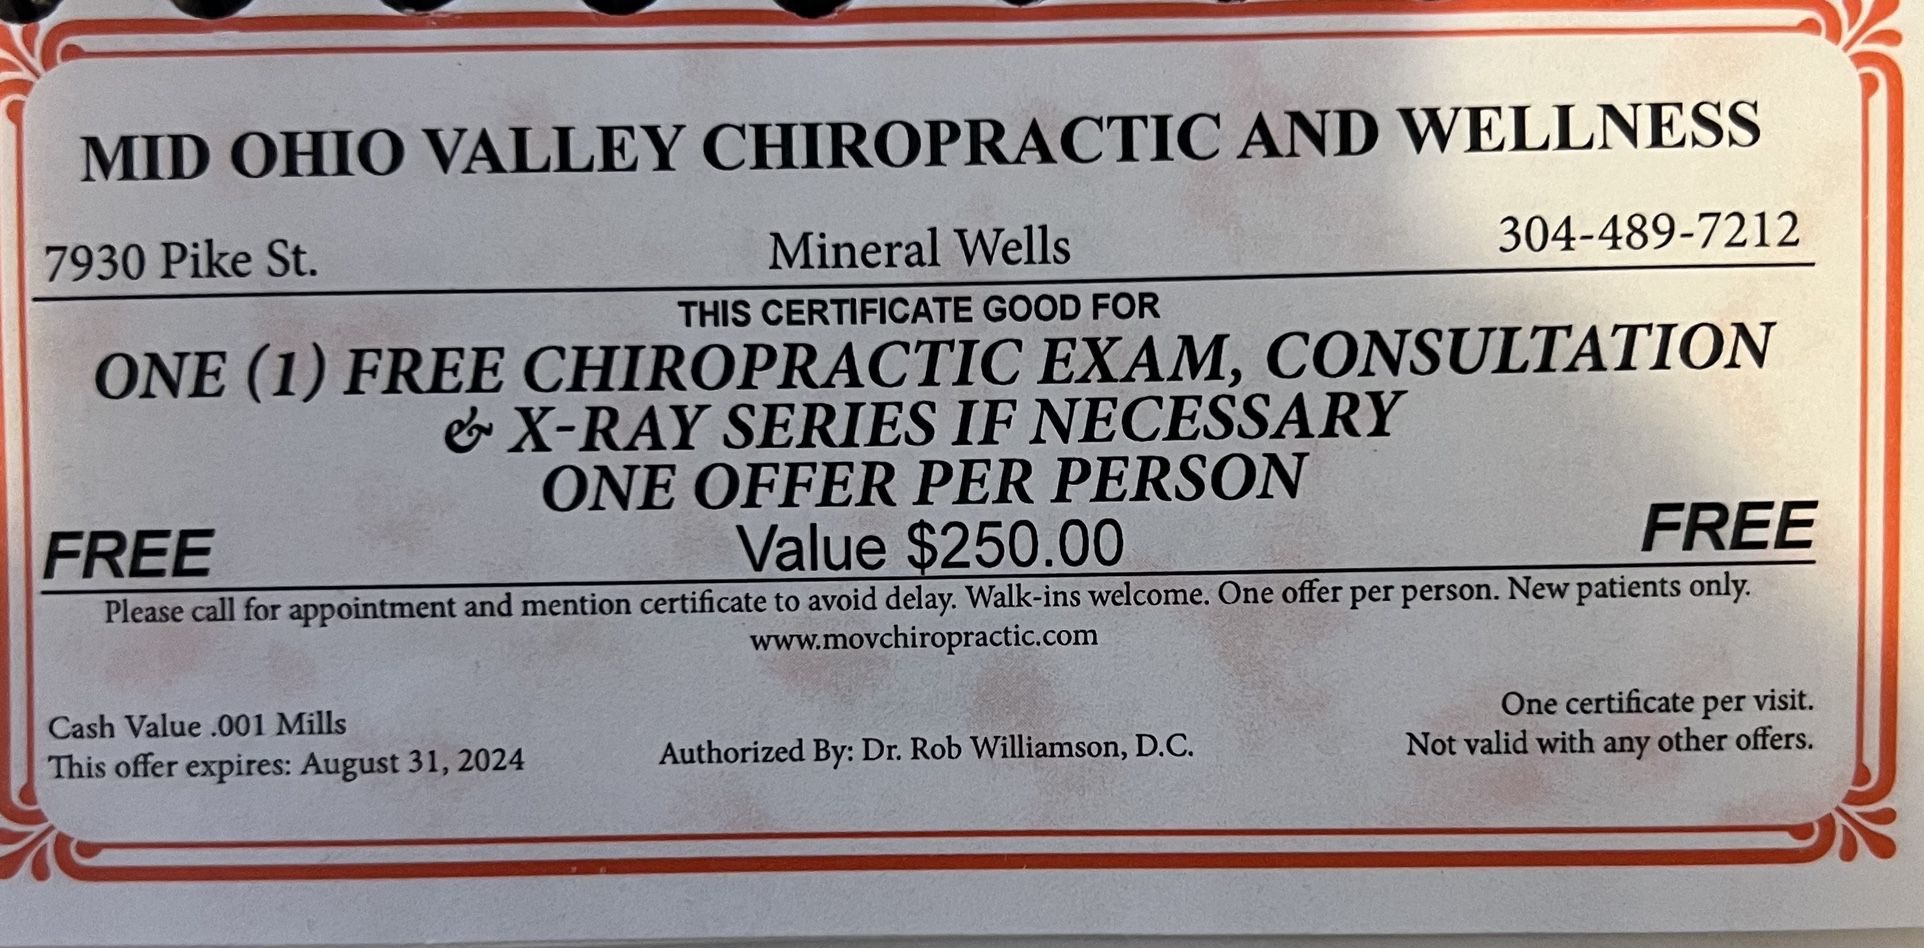 MID OHIO VALLEY CHIROPRACTIC AND WELLNESS